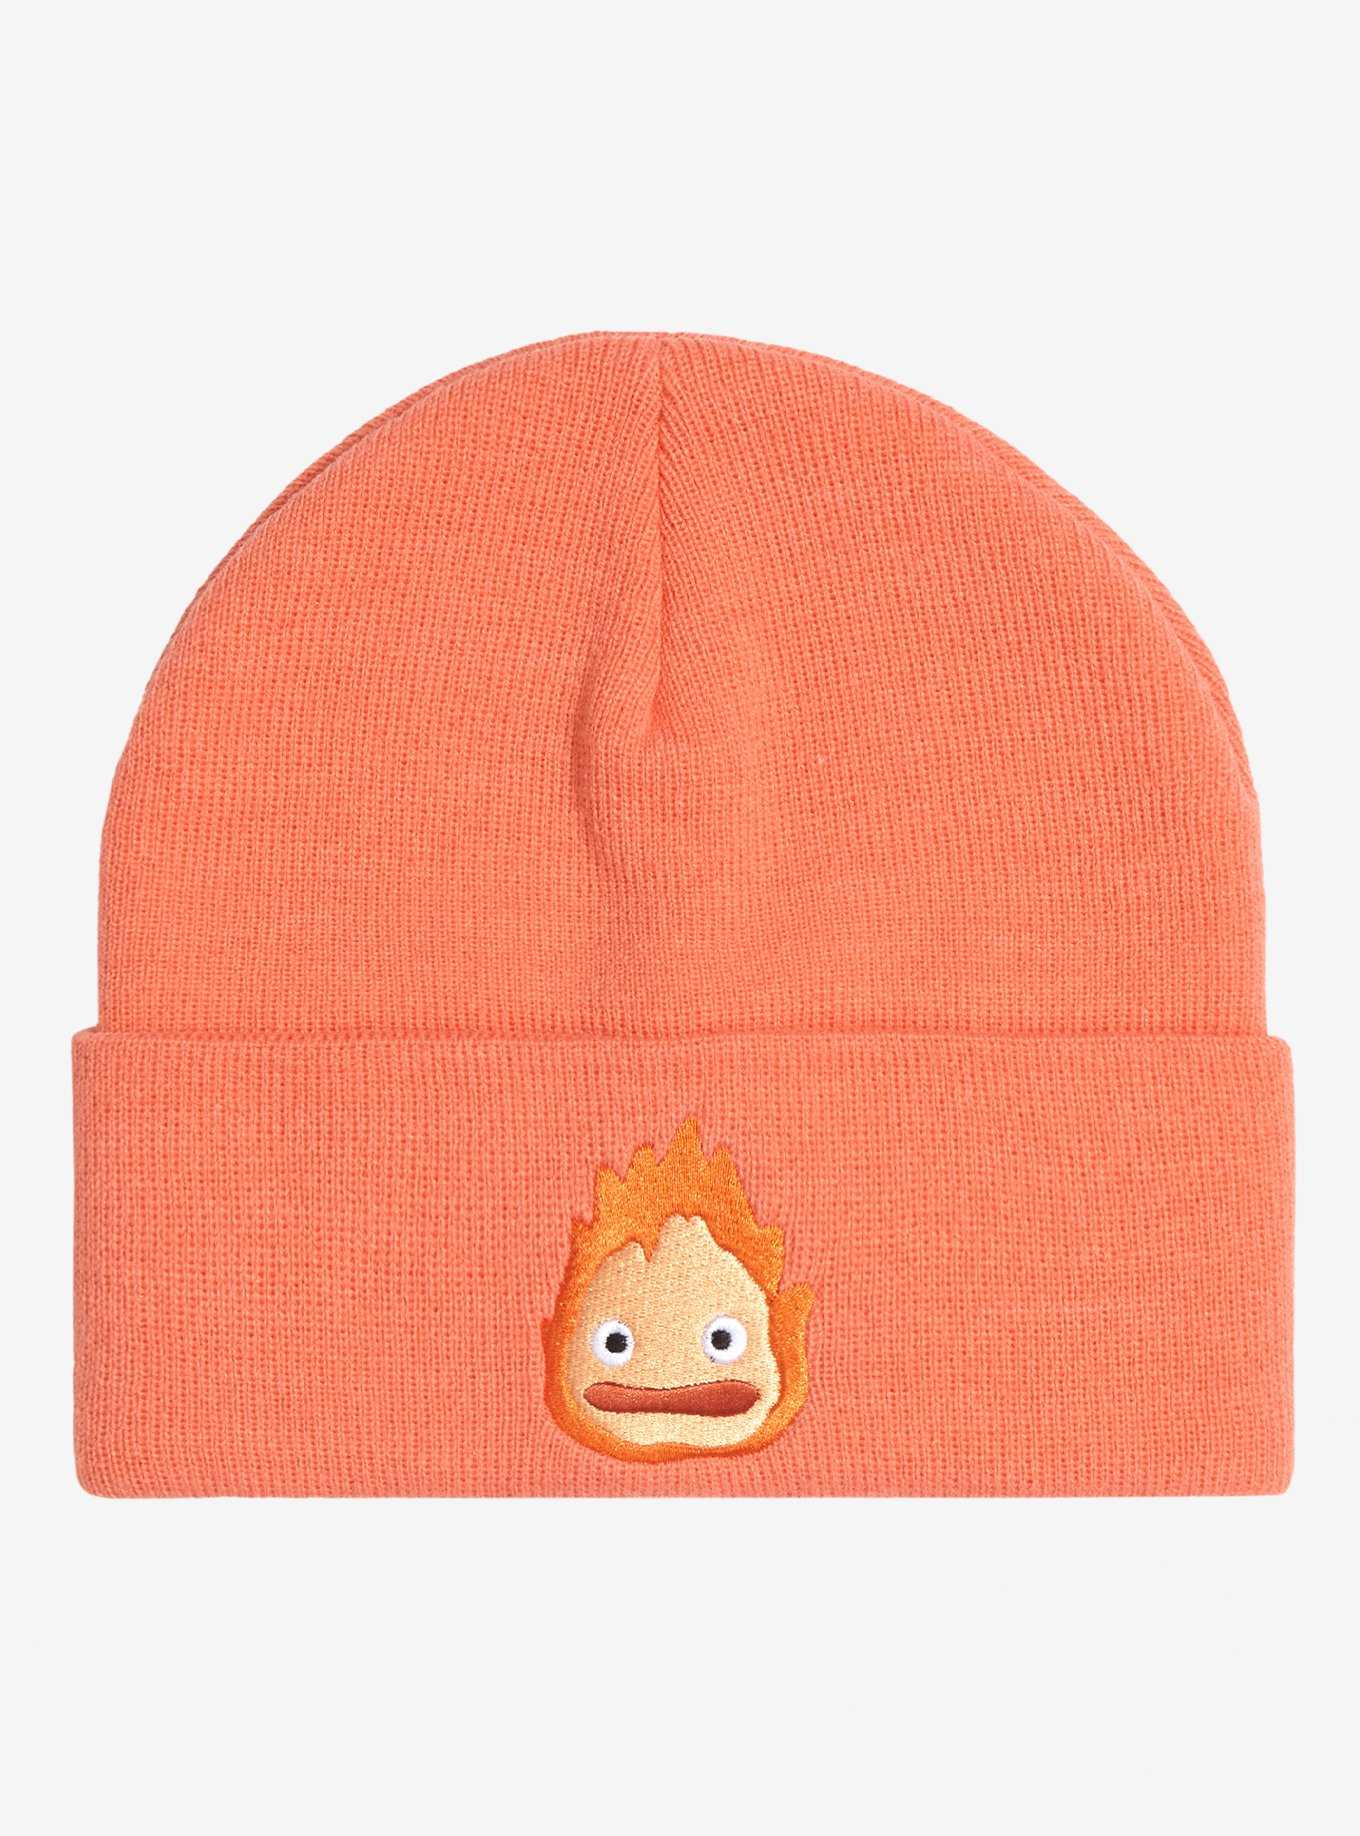 Cool Beanies: Slouchy, Trendy Beanies | & Culture Pop BoxLunch